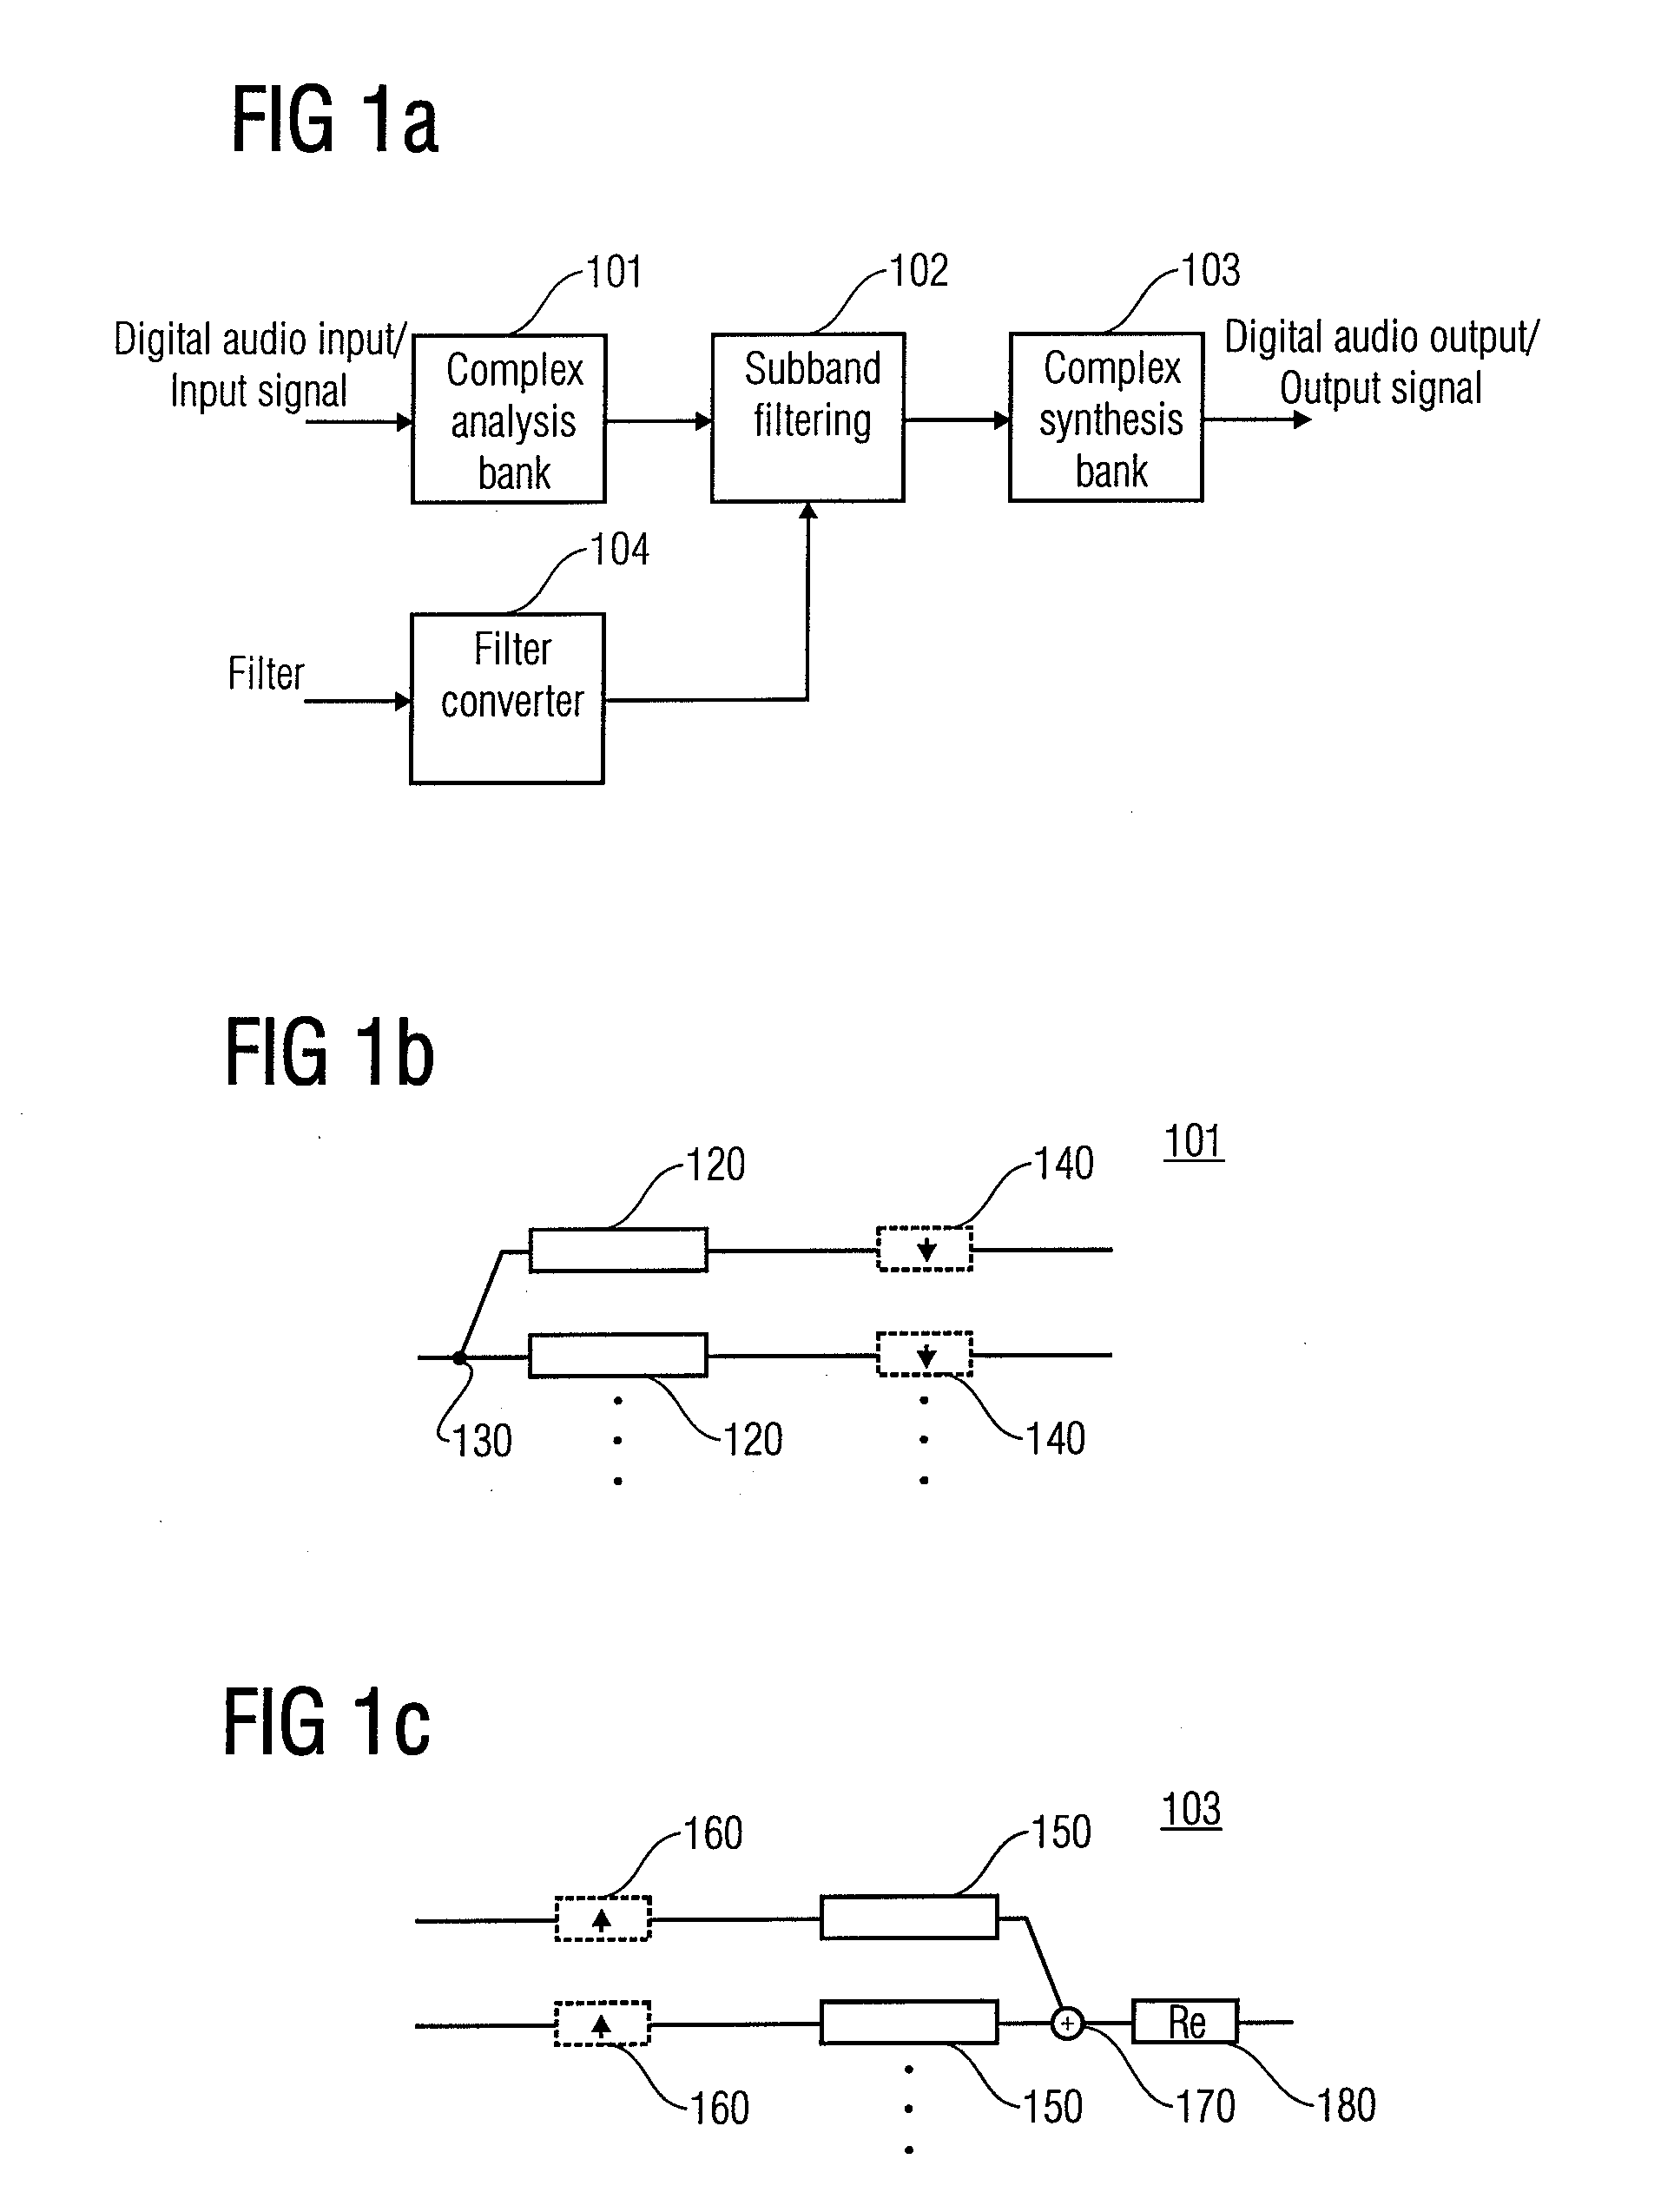 Efficient filtering with a complex modulated filterbank